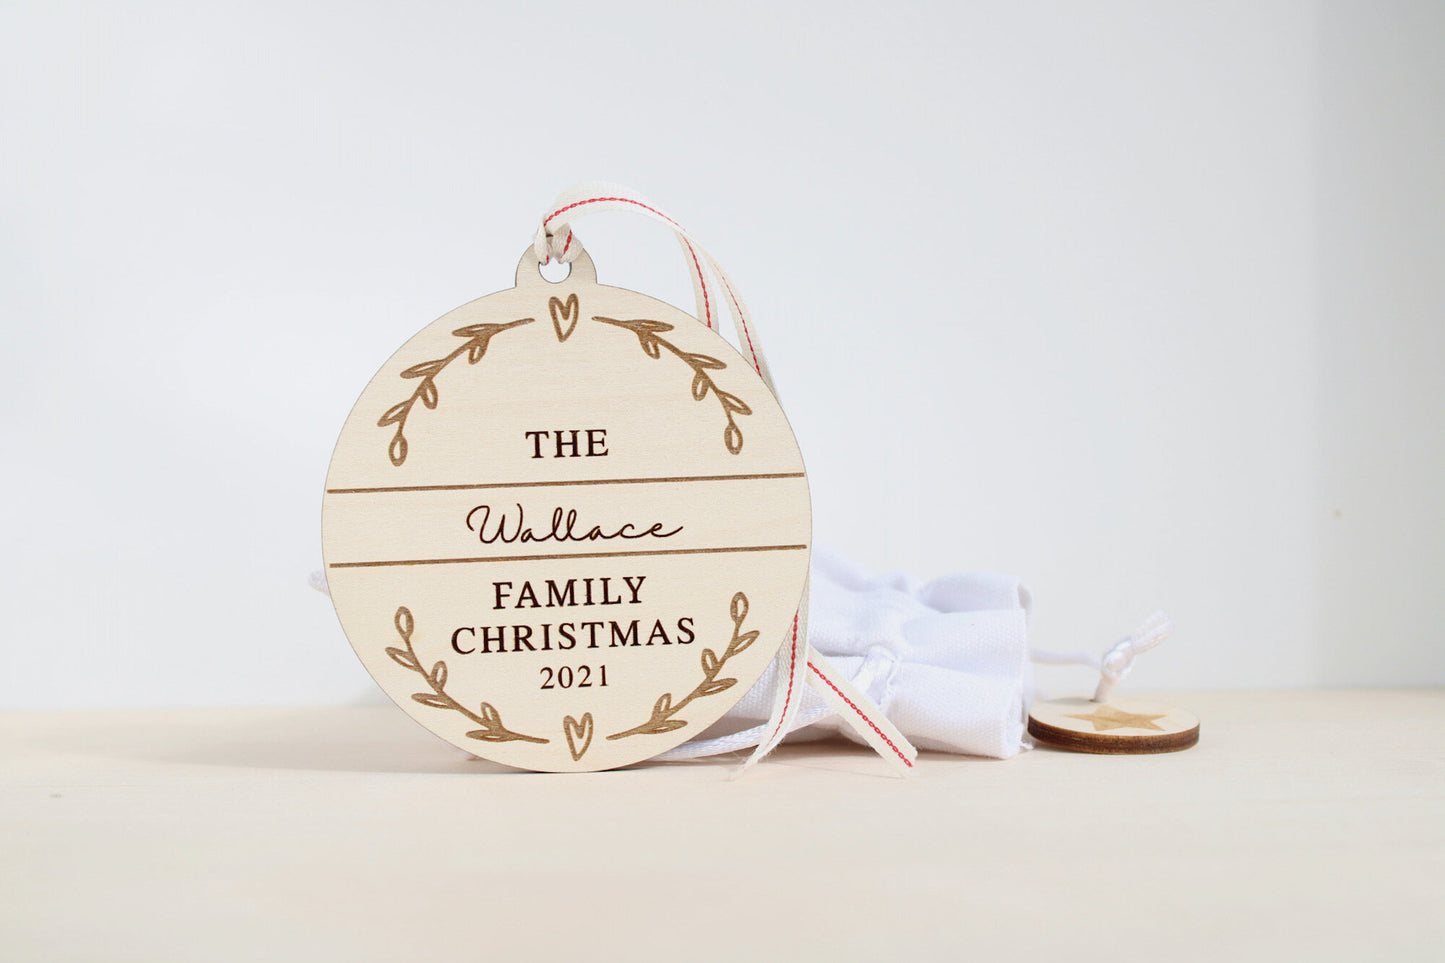 Family Christmas bauble decoration